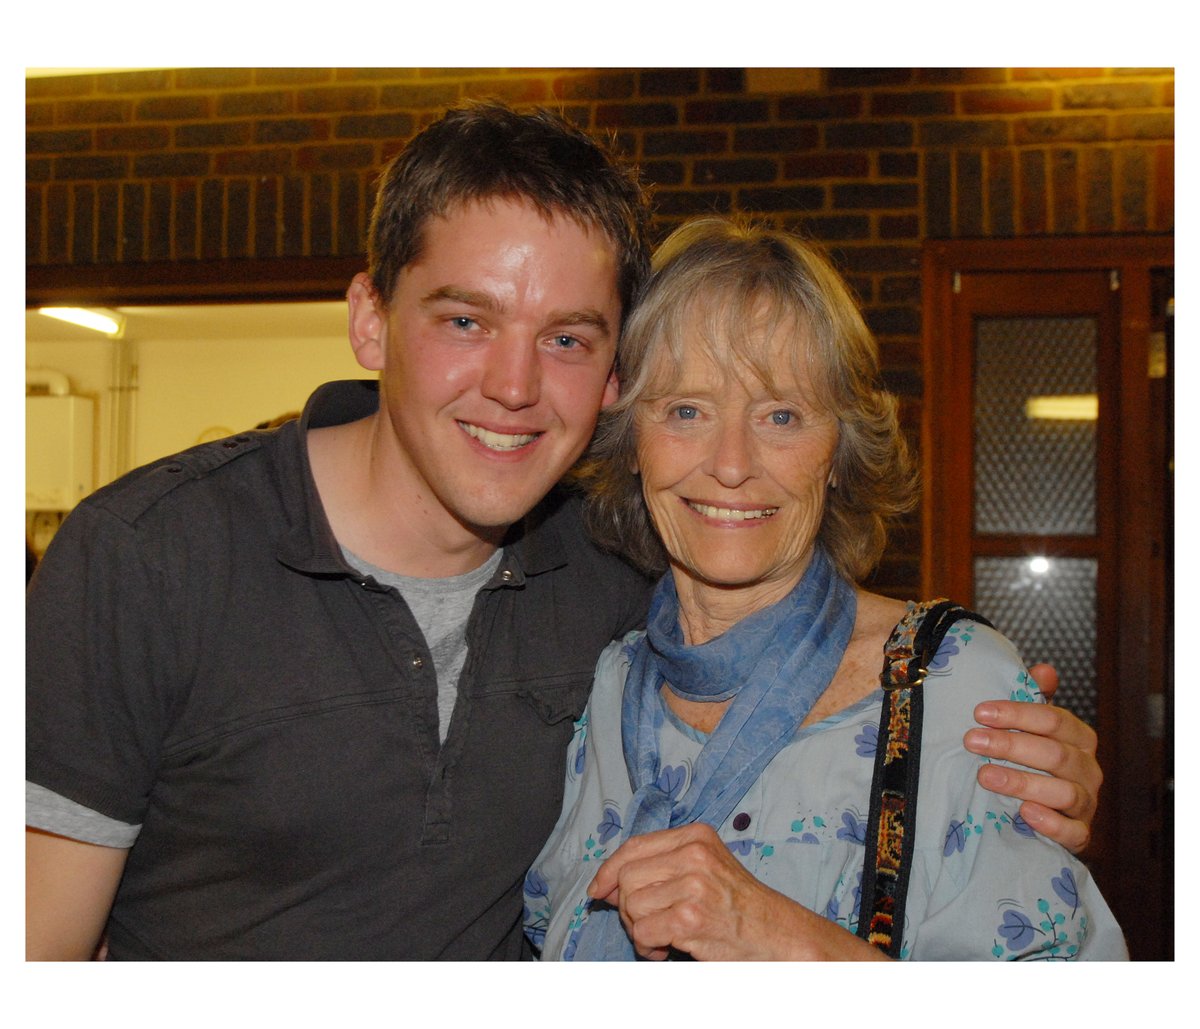 In 2010, I had the privilege of doing the soundtrack for the movie 'Love/Loss' starring the amazing Virginia McKenna. I was delighted to hear of her recent Damehood. Outstanding work for endangered animals, and one of the nicest people you could ever meet!